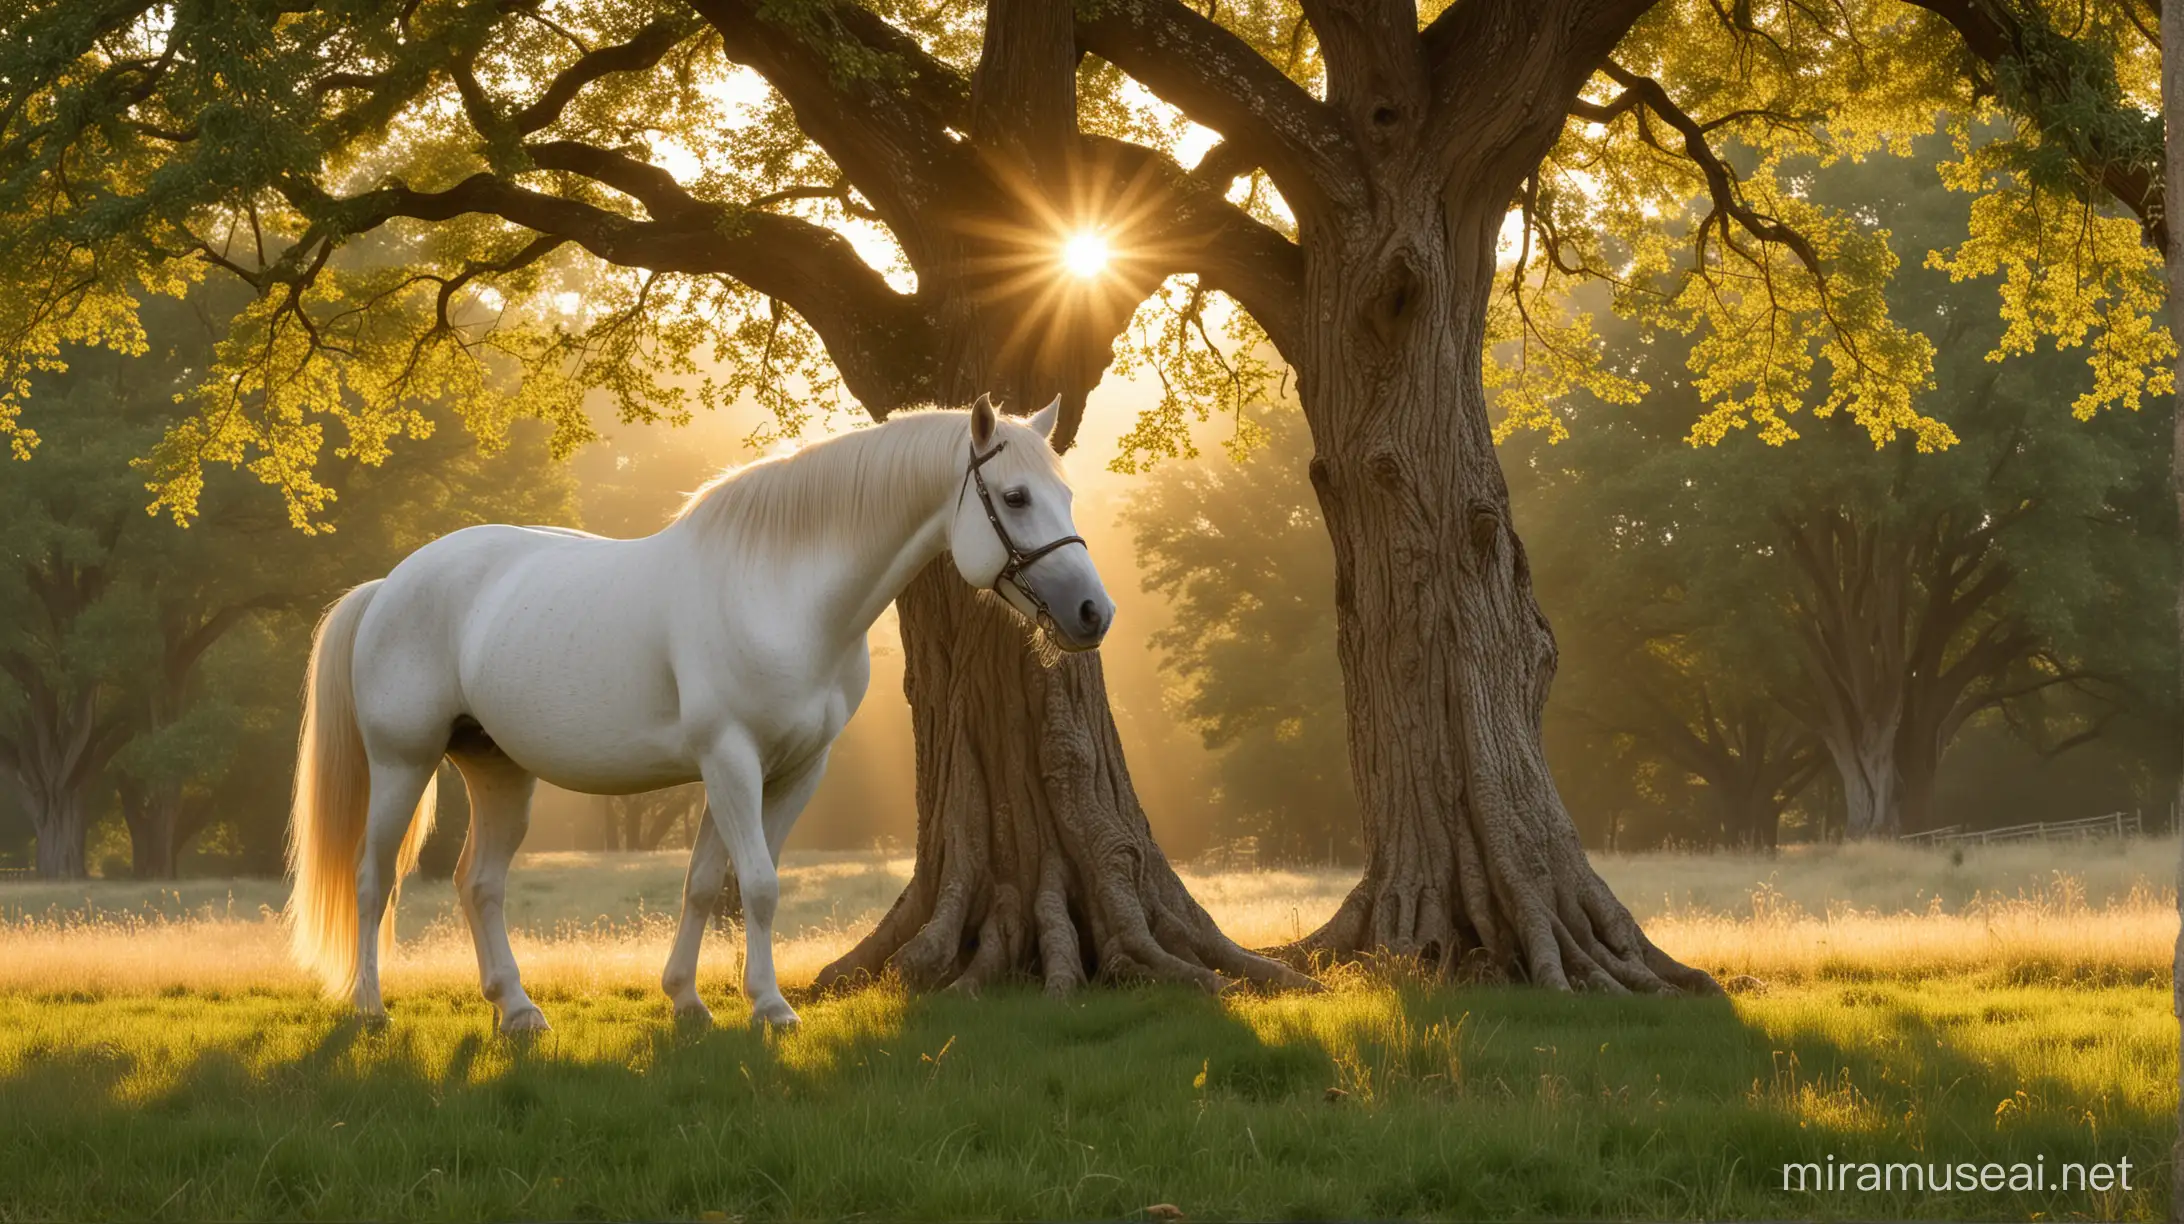 The sun hung low in the sky, casting a warm golden glow over the meadow as Jack wandered through the fields. His eyes lit up with excitement as he spotted a magnificent white horse grazing peacefully under the shade of an old oak tree. With cautious steps, Jack approached, marveling at the horse's beauty.